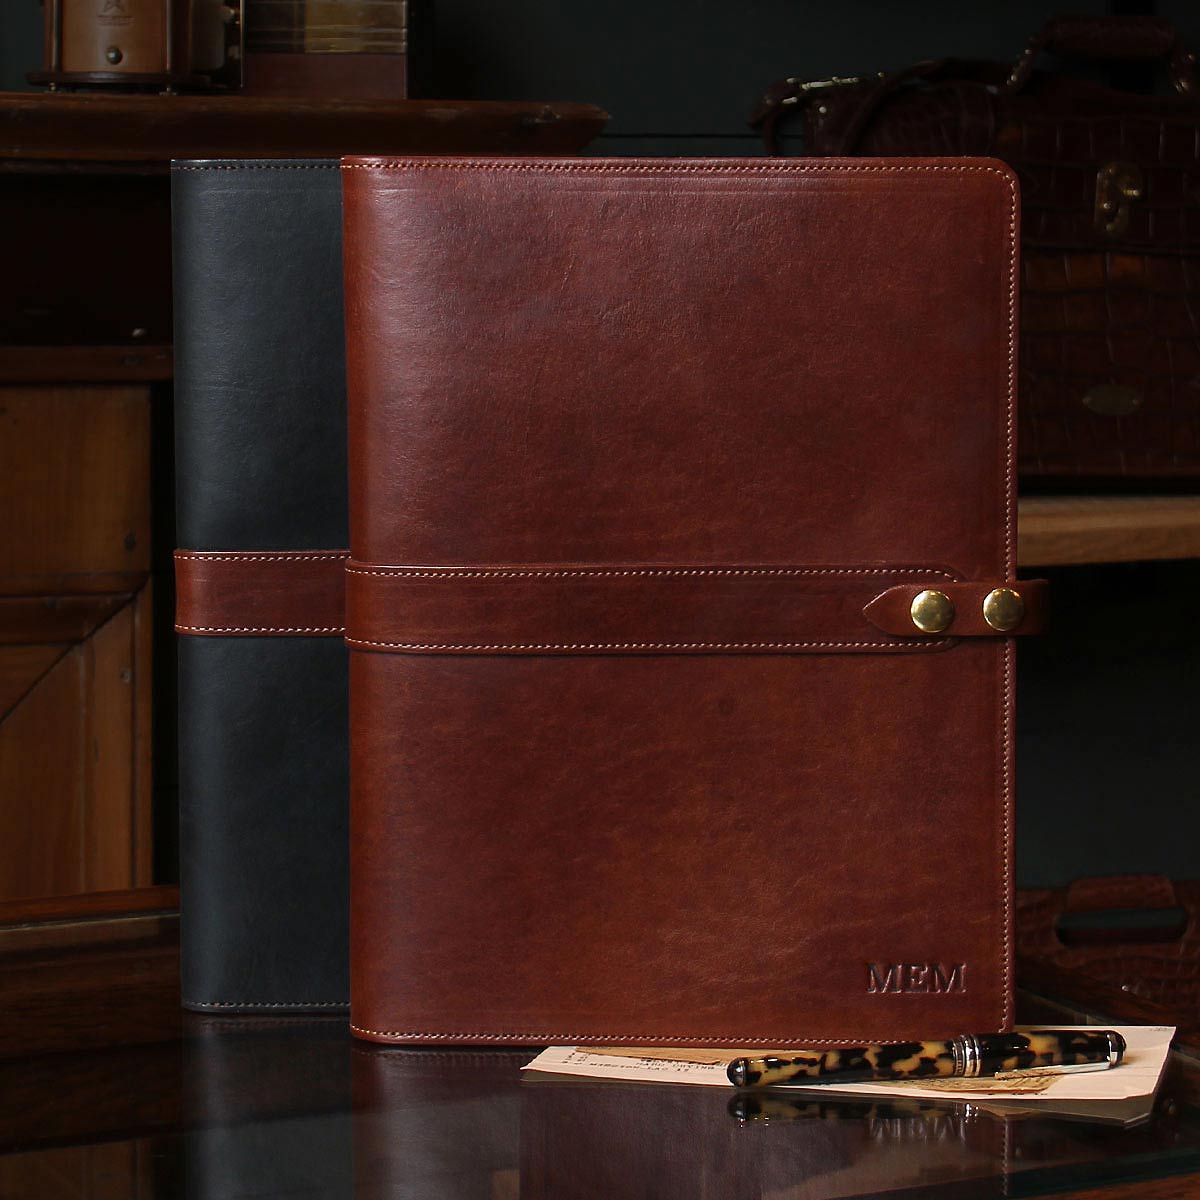 Leather Pocket Folio, Wallet, Made in USA